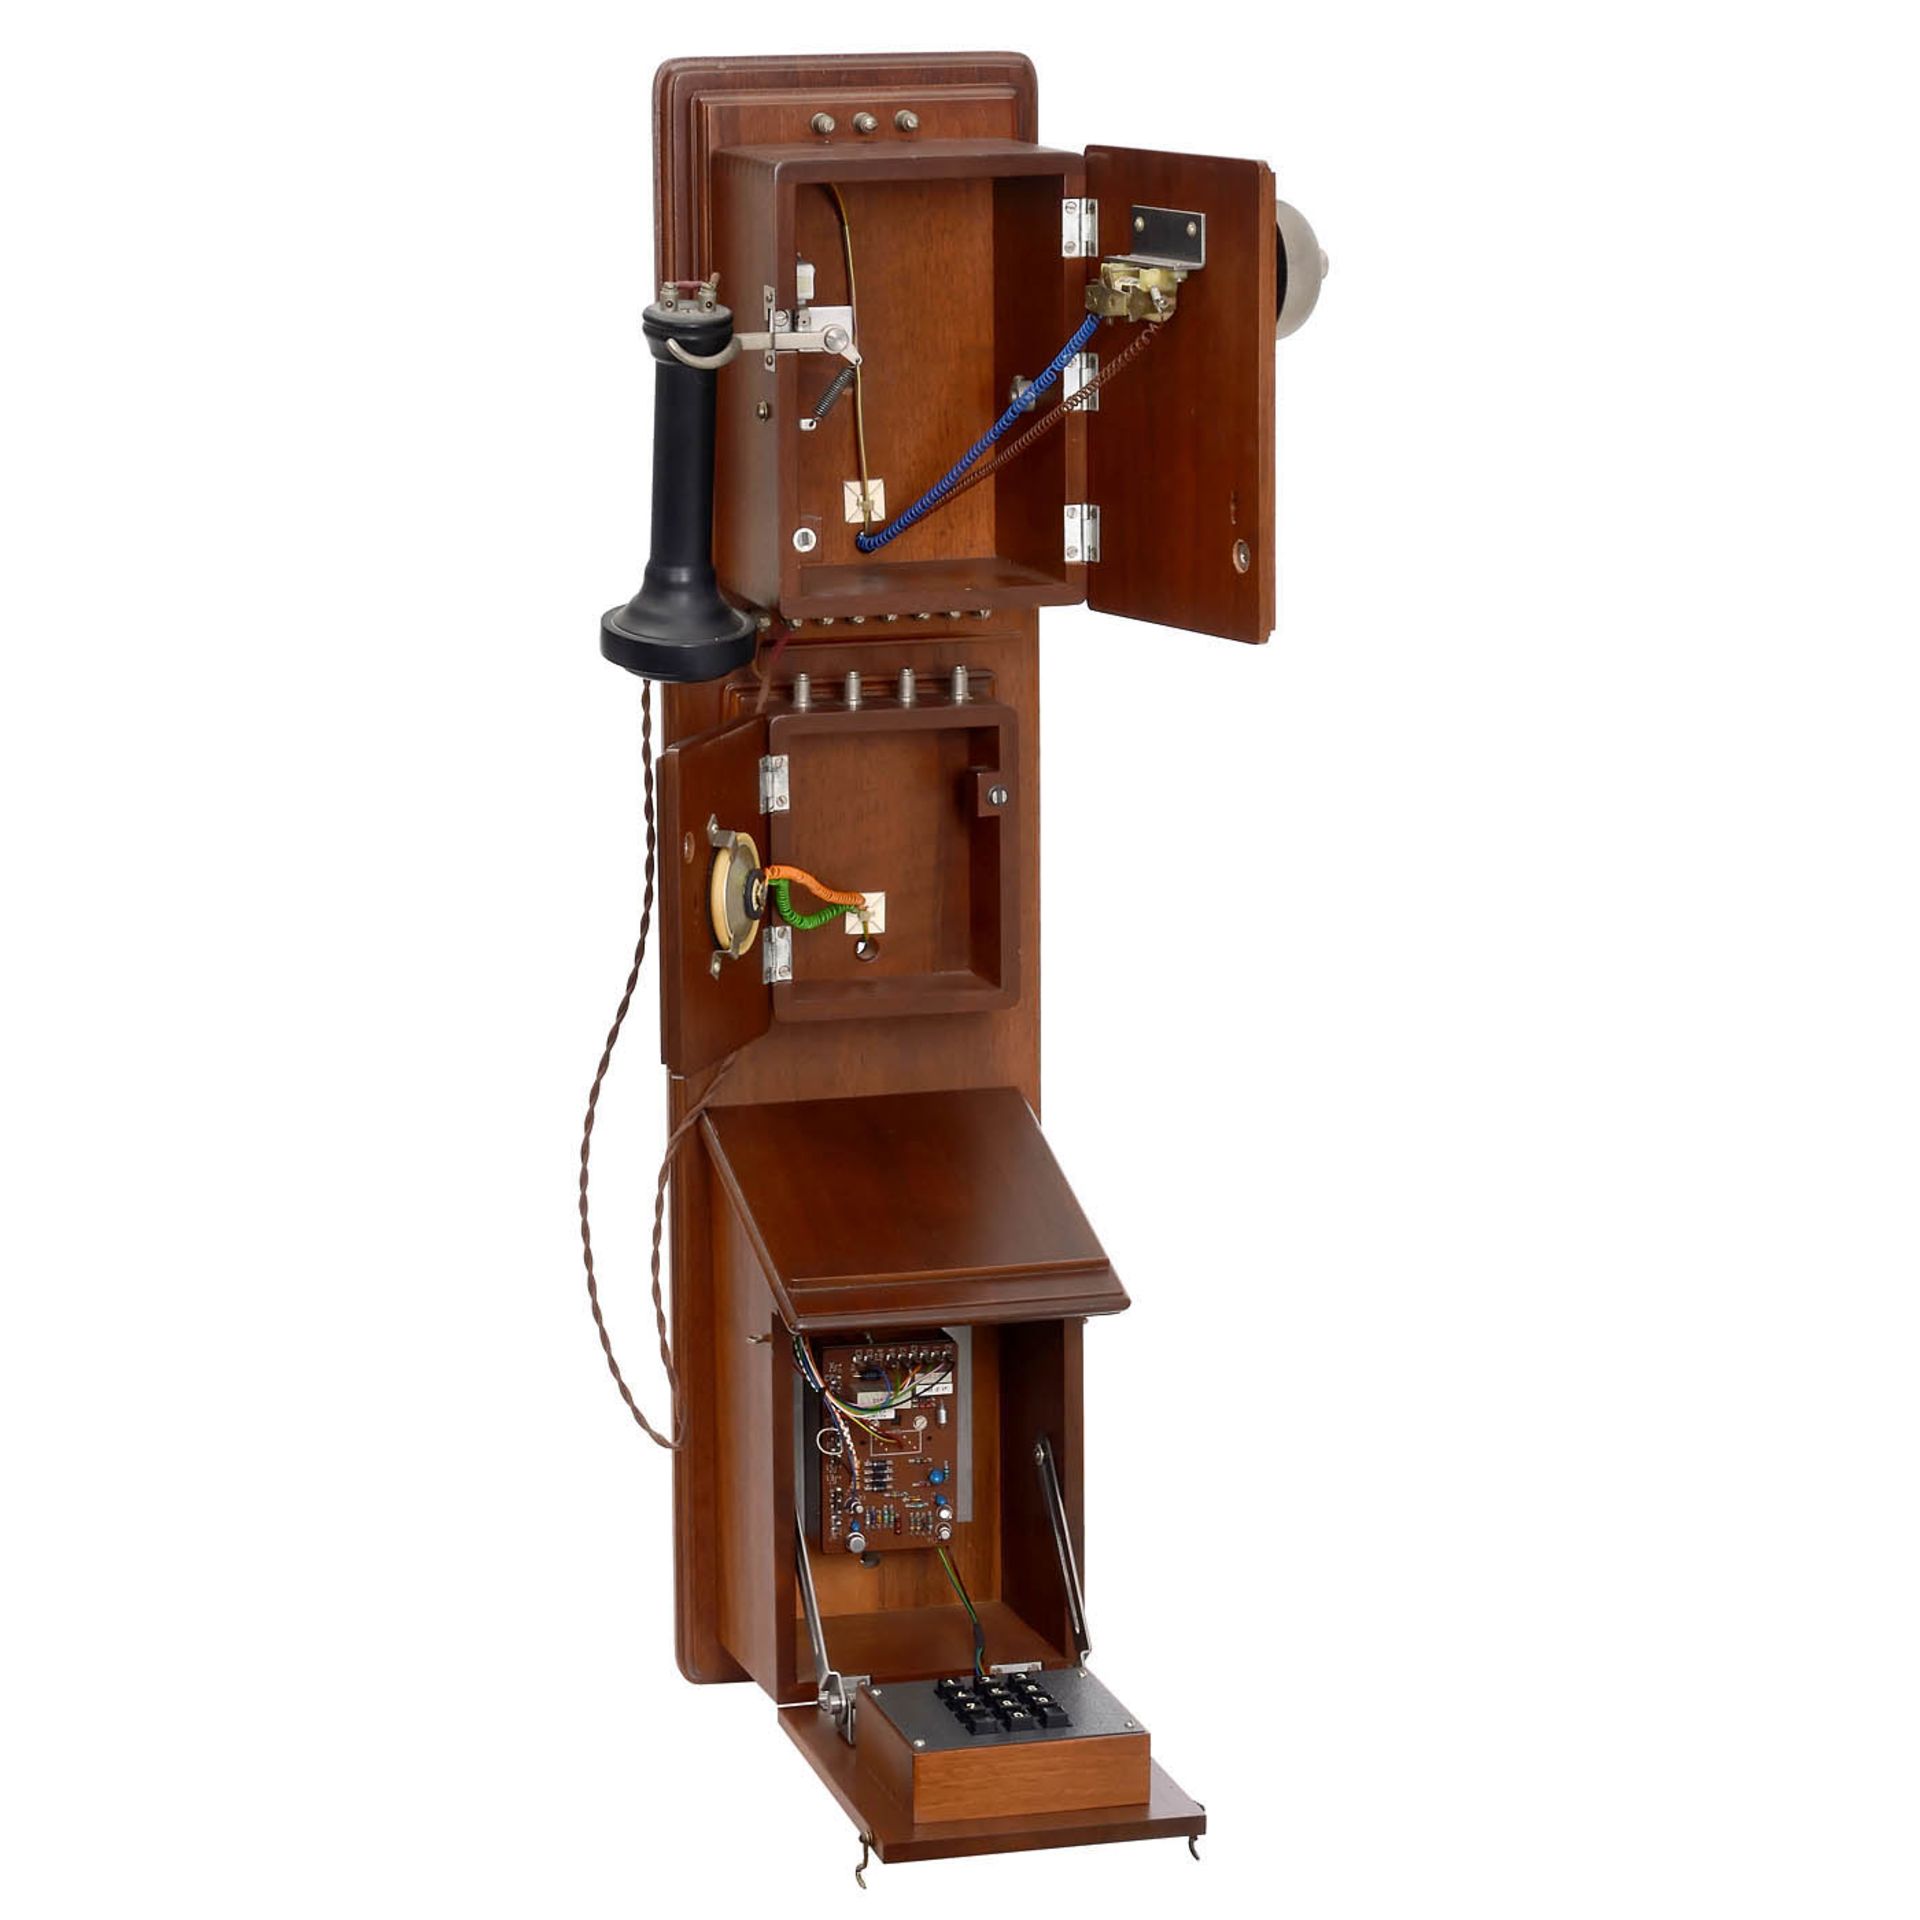 Limited Edition "100 Years Bell Telephone", 1982 - Image 2 of 2